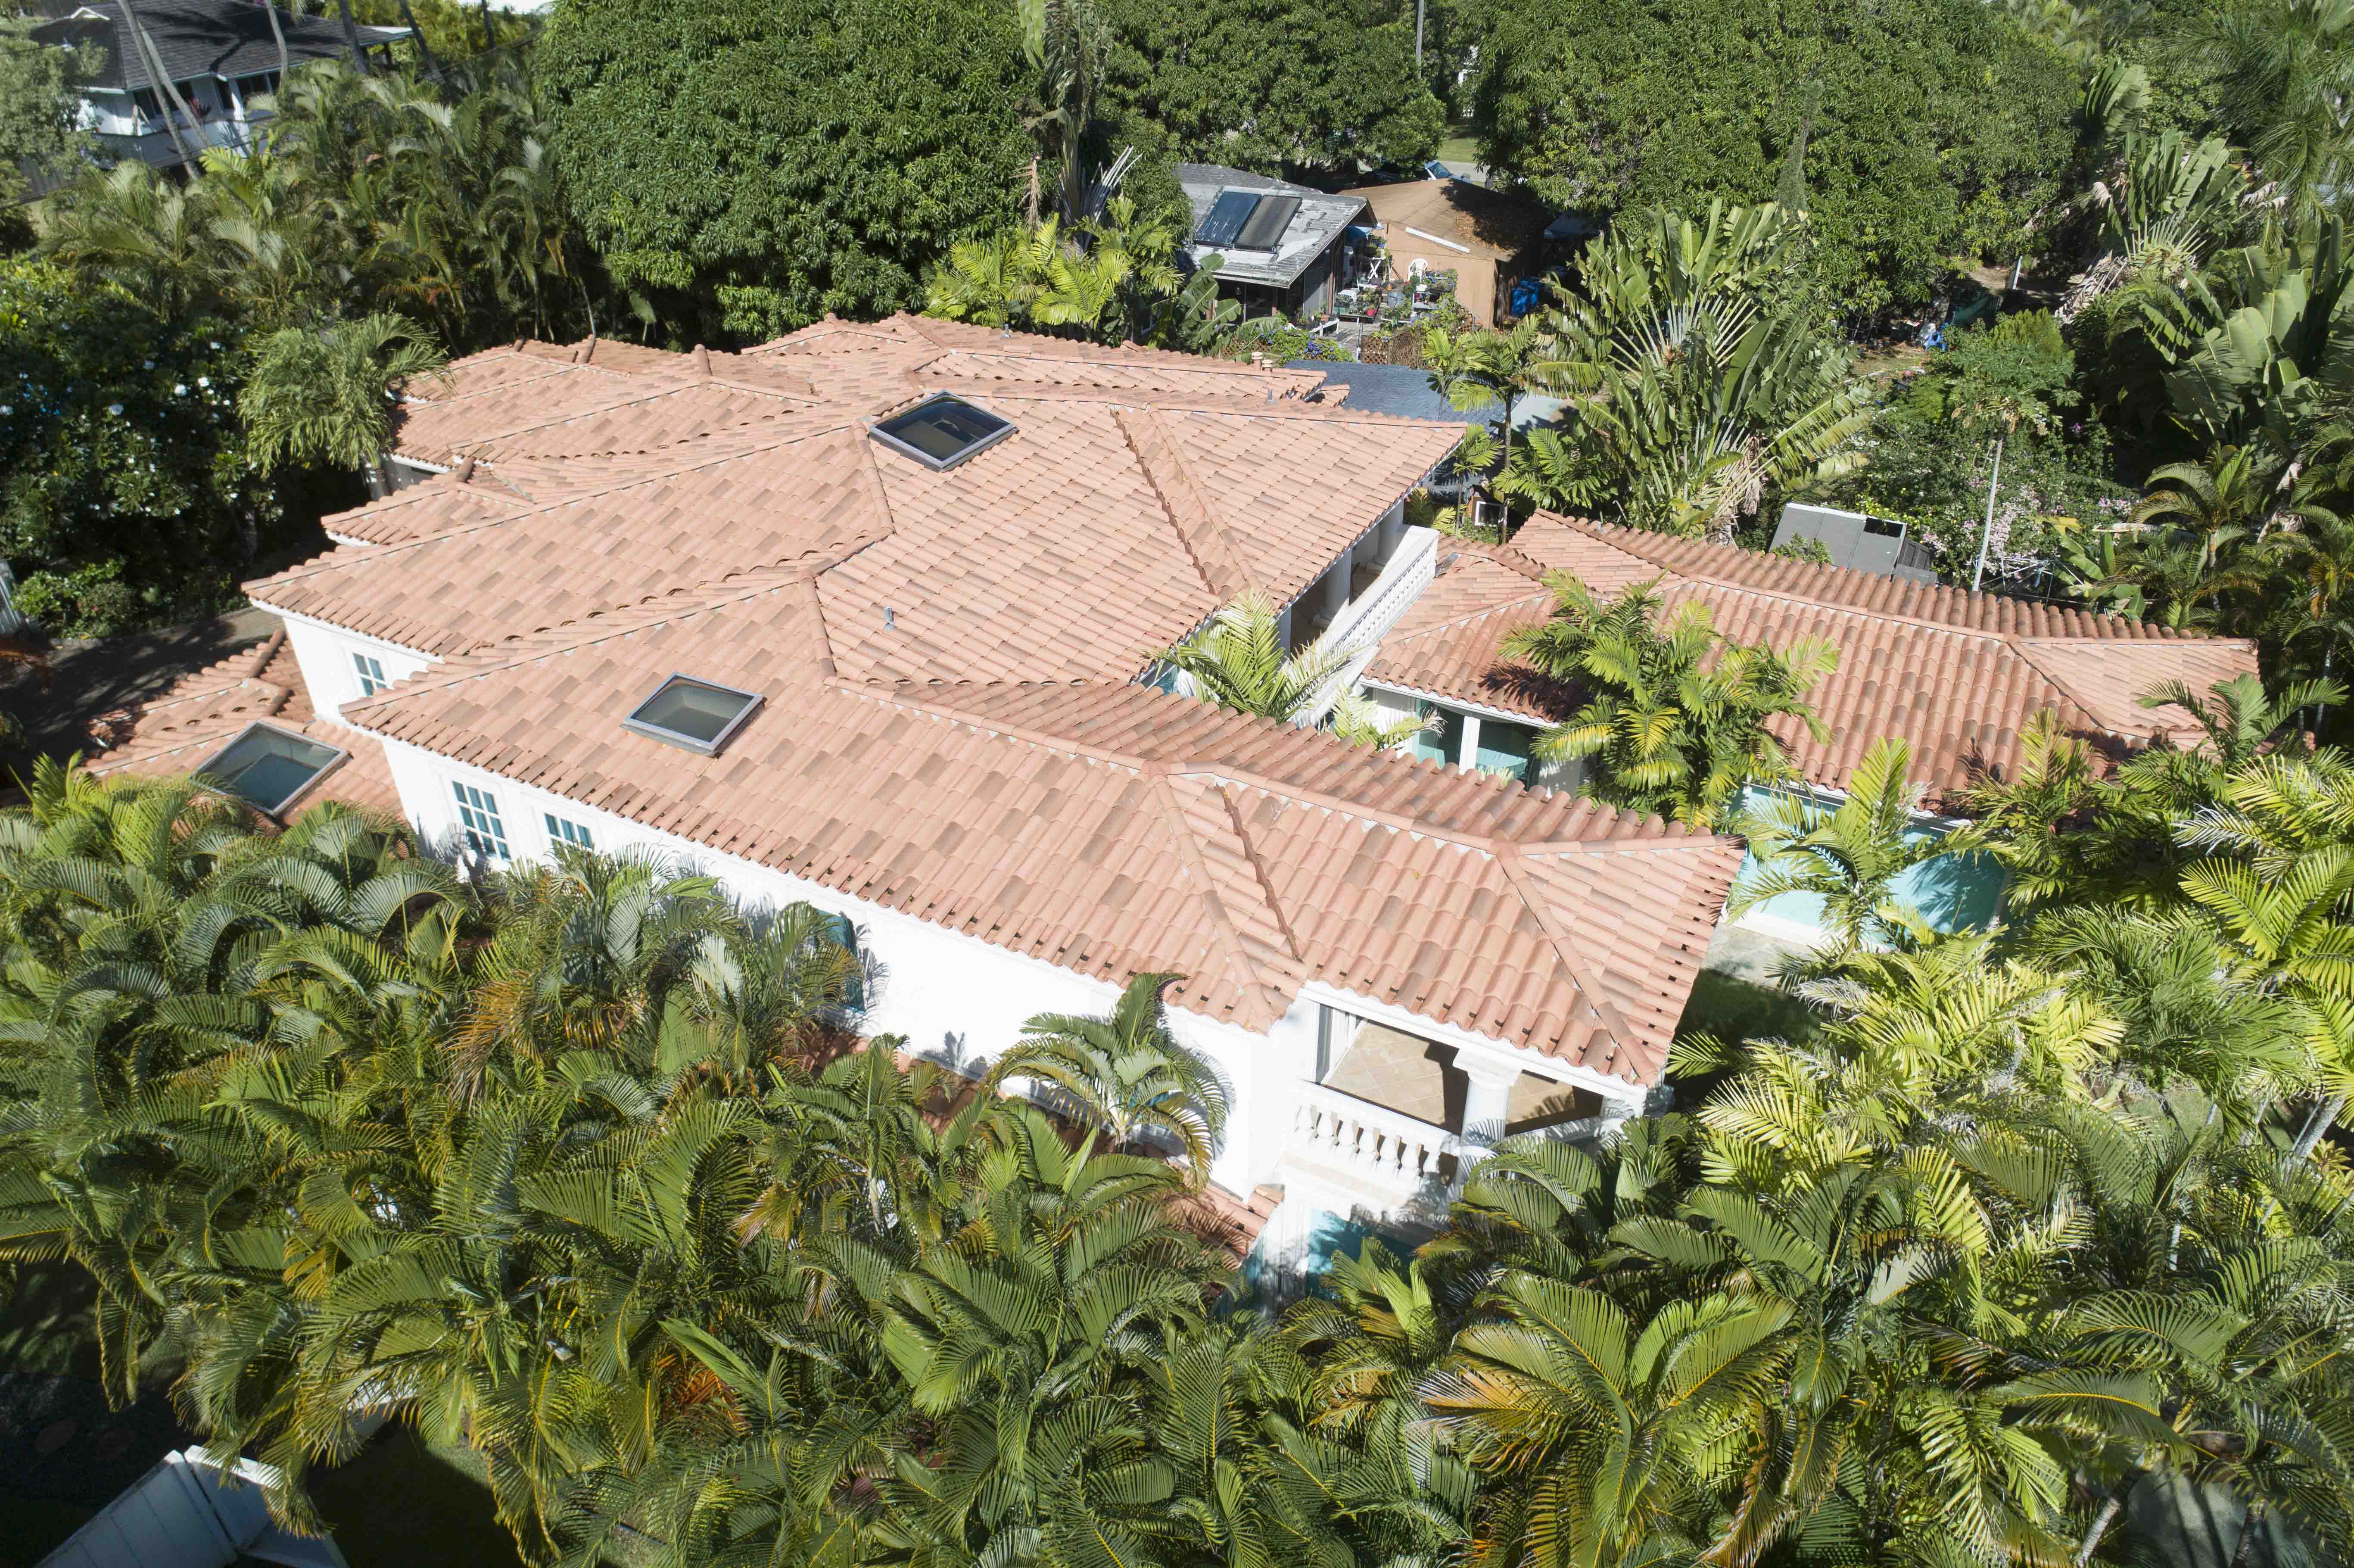 Kailua Roofing Project